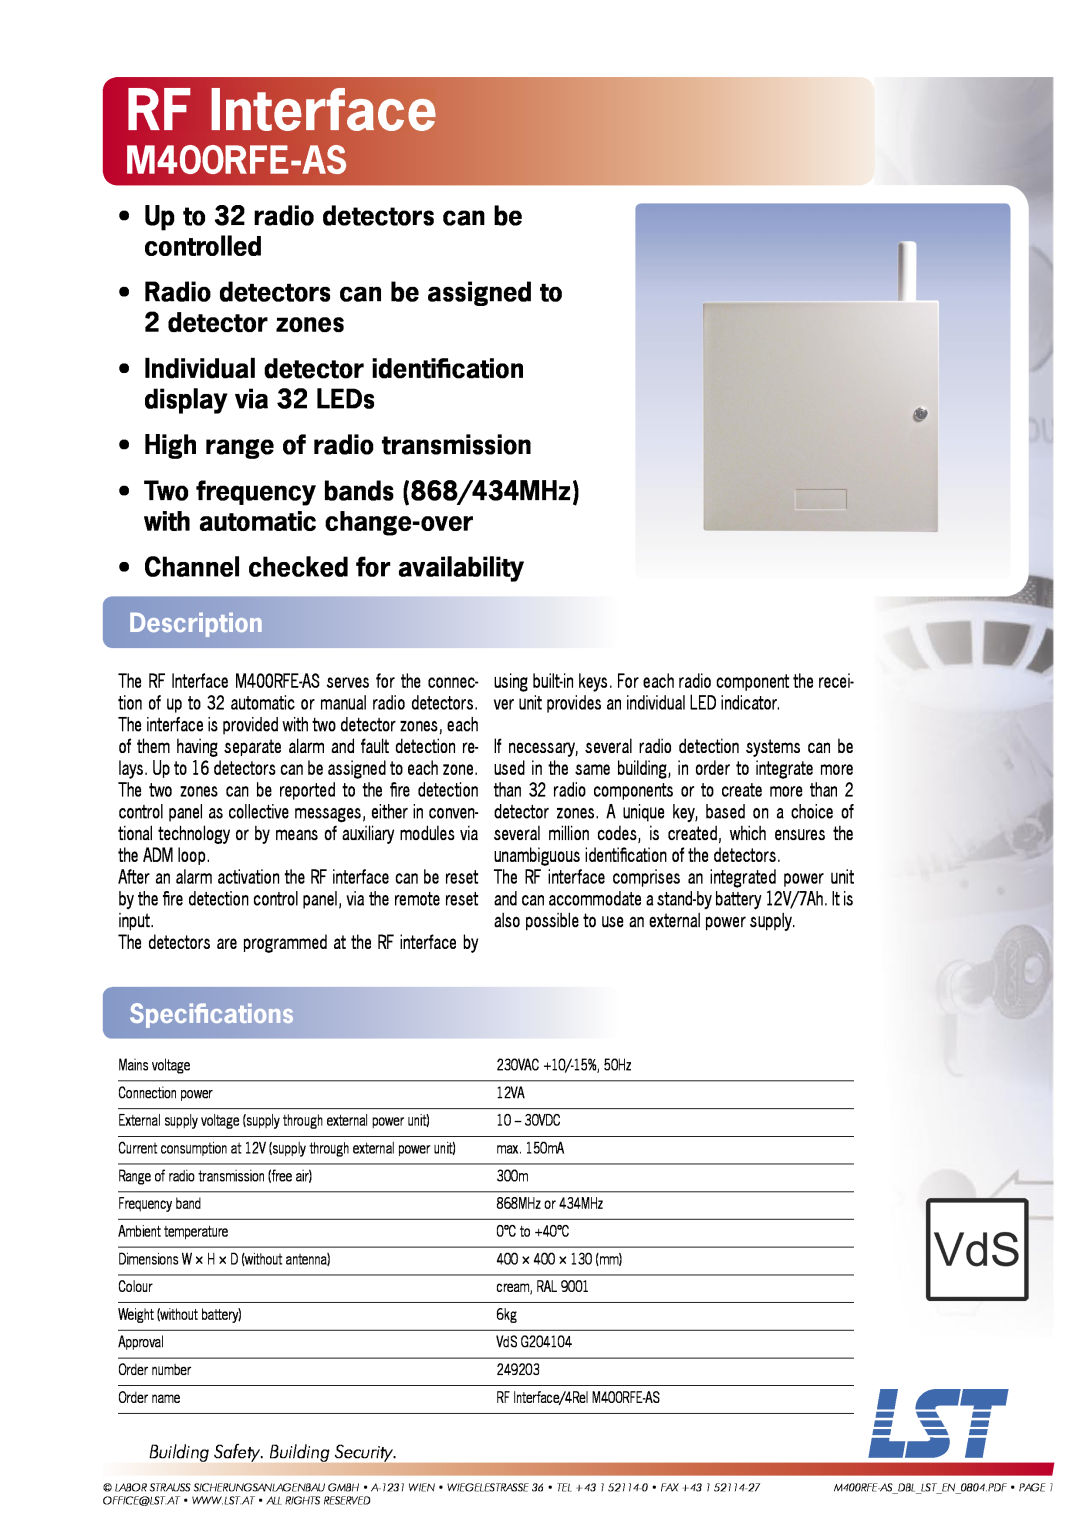 LST M400RFE-AS specifications RF Interface, Up to 32 radio detectors can be controlled, High range of radio transmission 